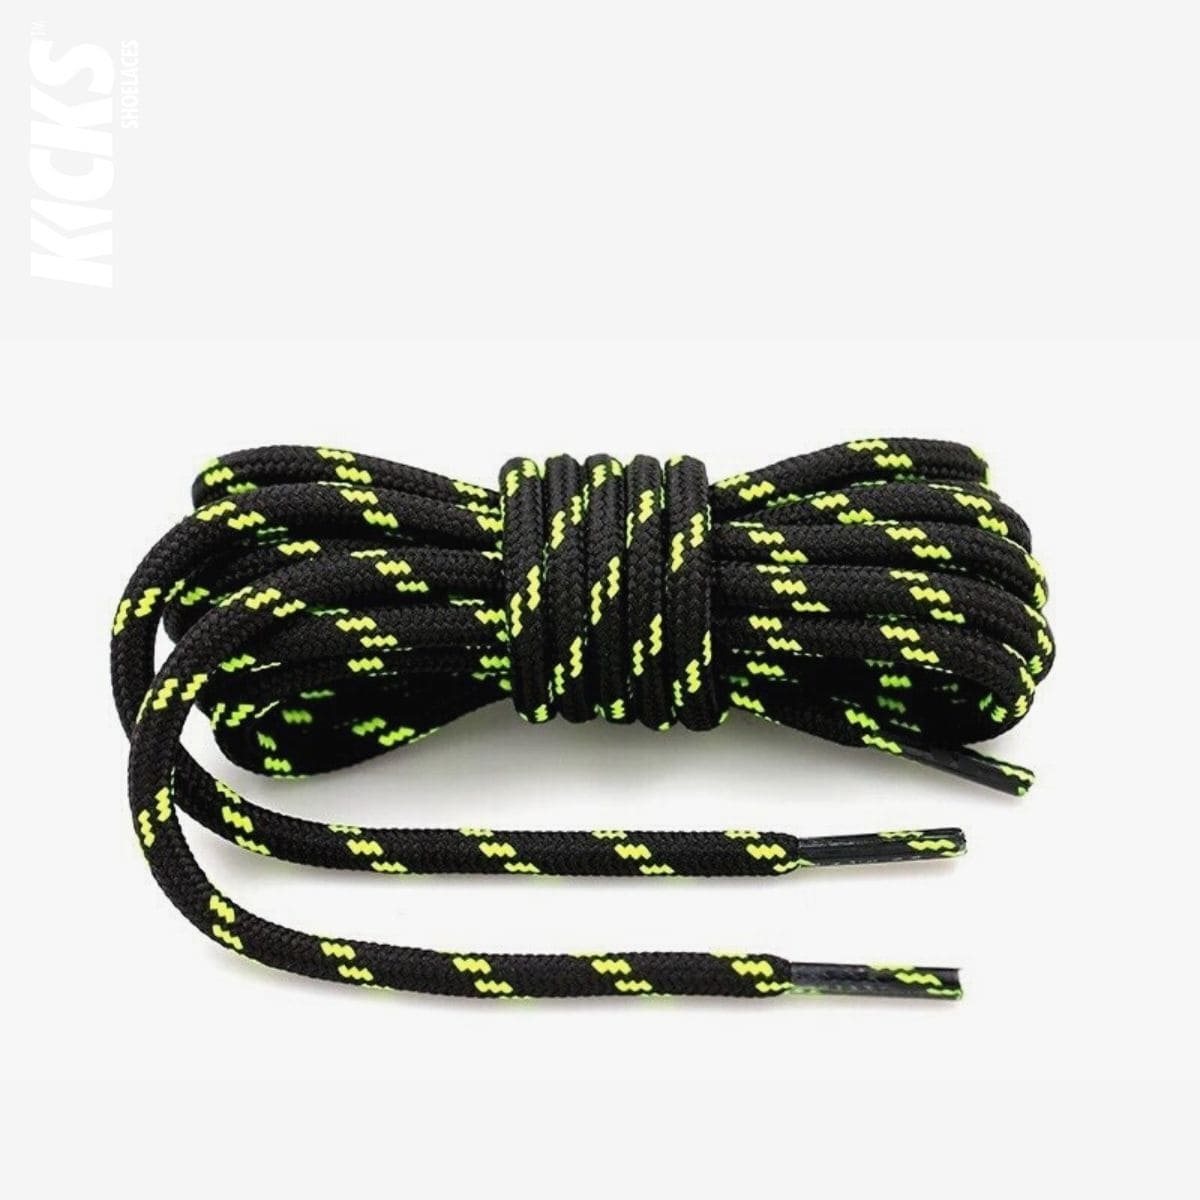 trekking-shoe-laces-united-states-in-black-and-green-shop-online